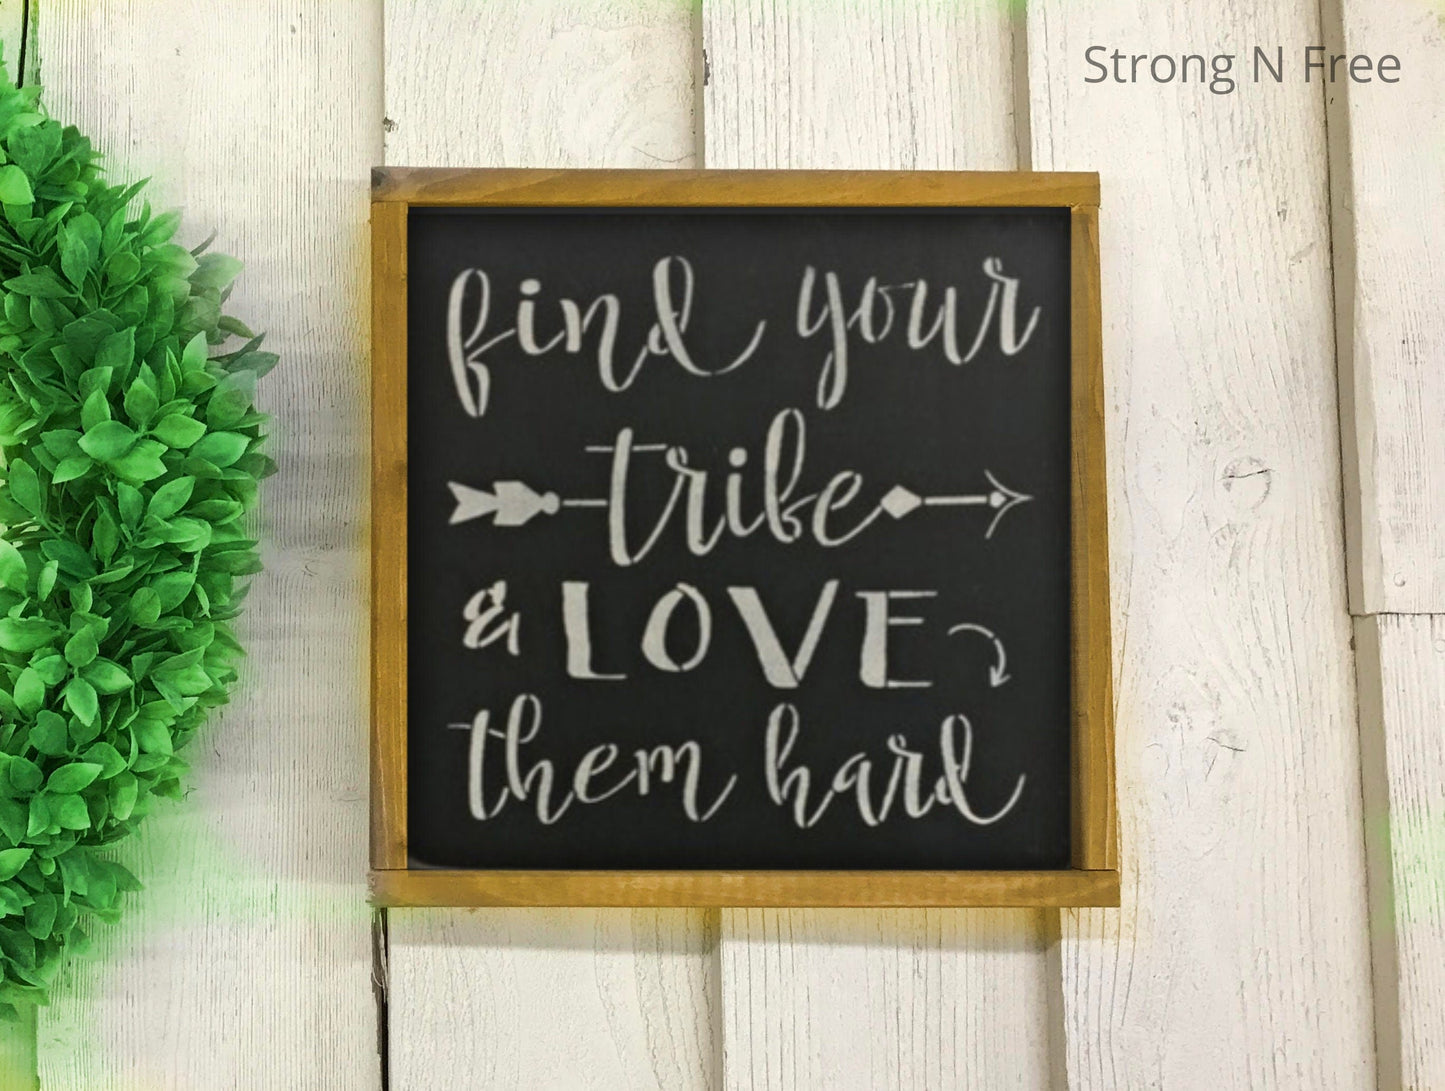 Find your tribe love them hard, tribe sign, gift for friend, friendship gifts, gifts for friends far away,